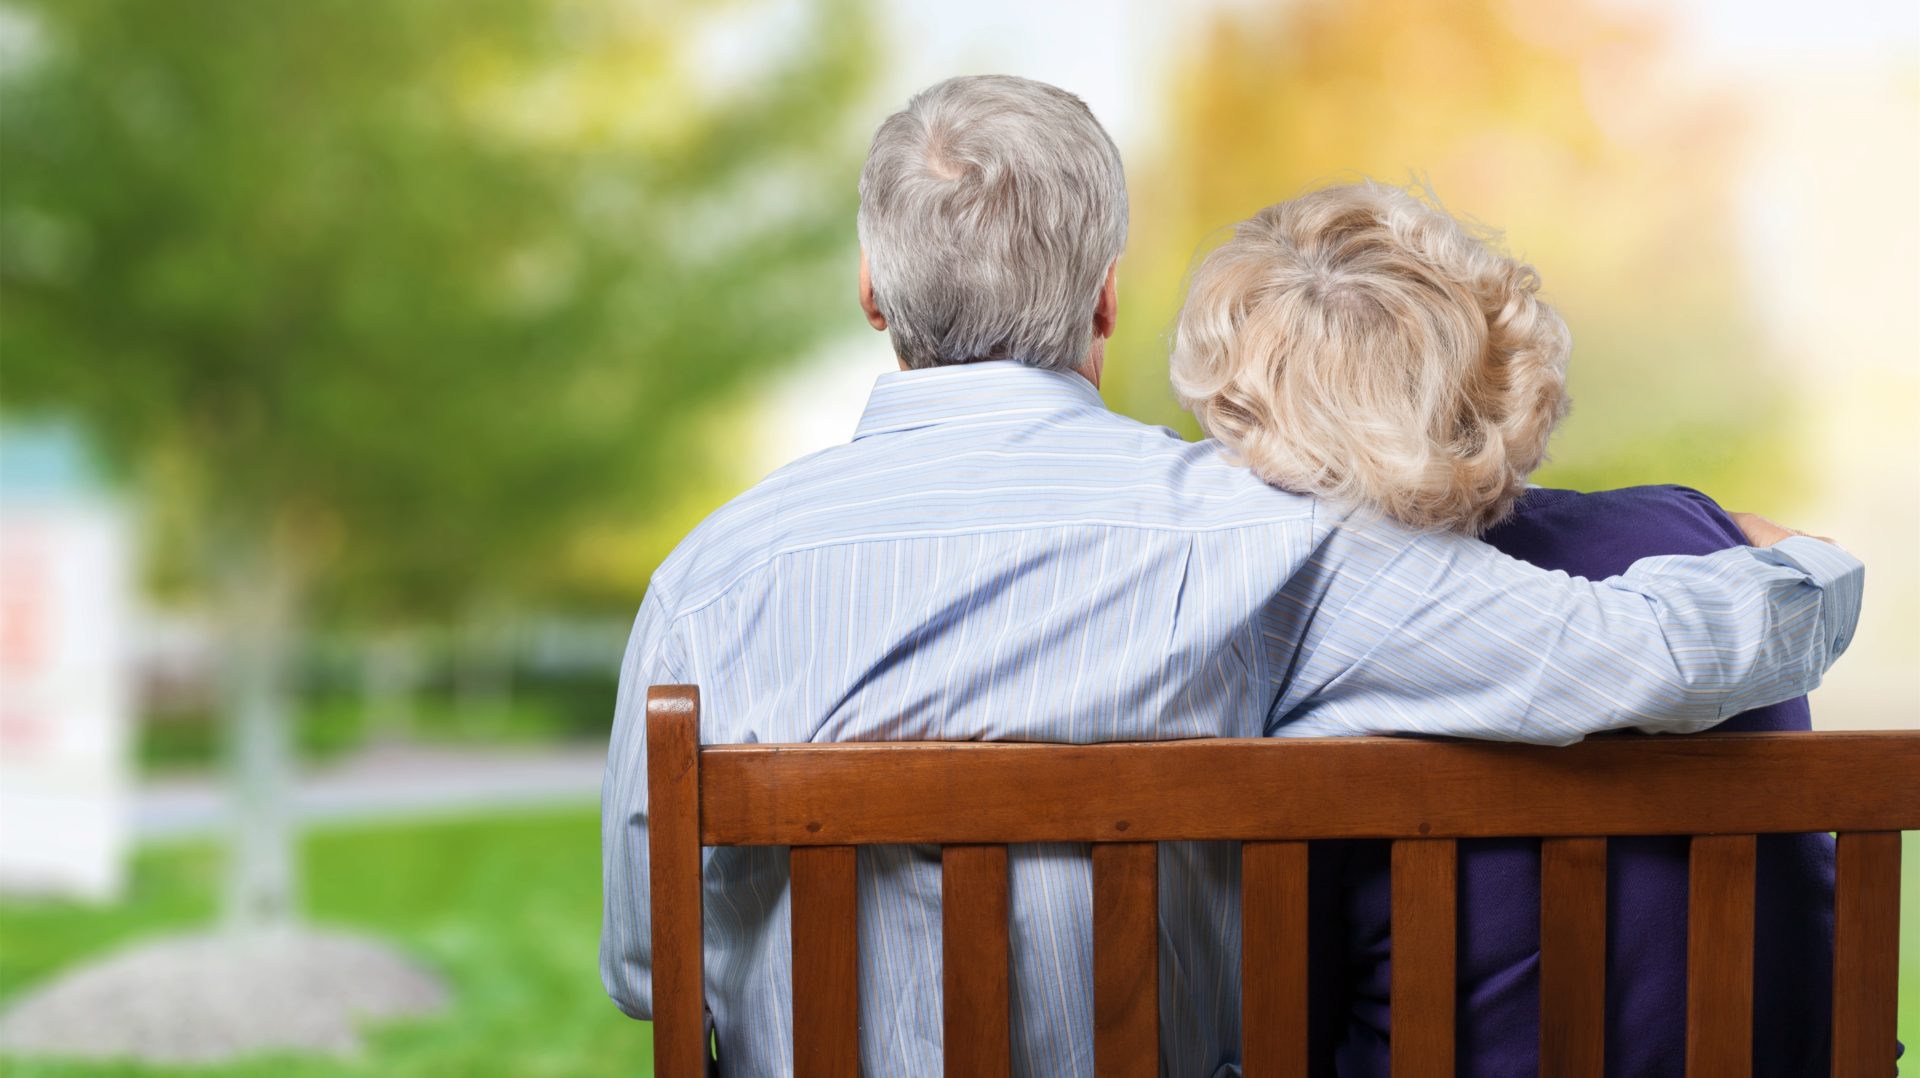 Does an Elder Law Attorney Represent the Senior or the Adult Children?